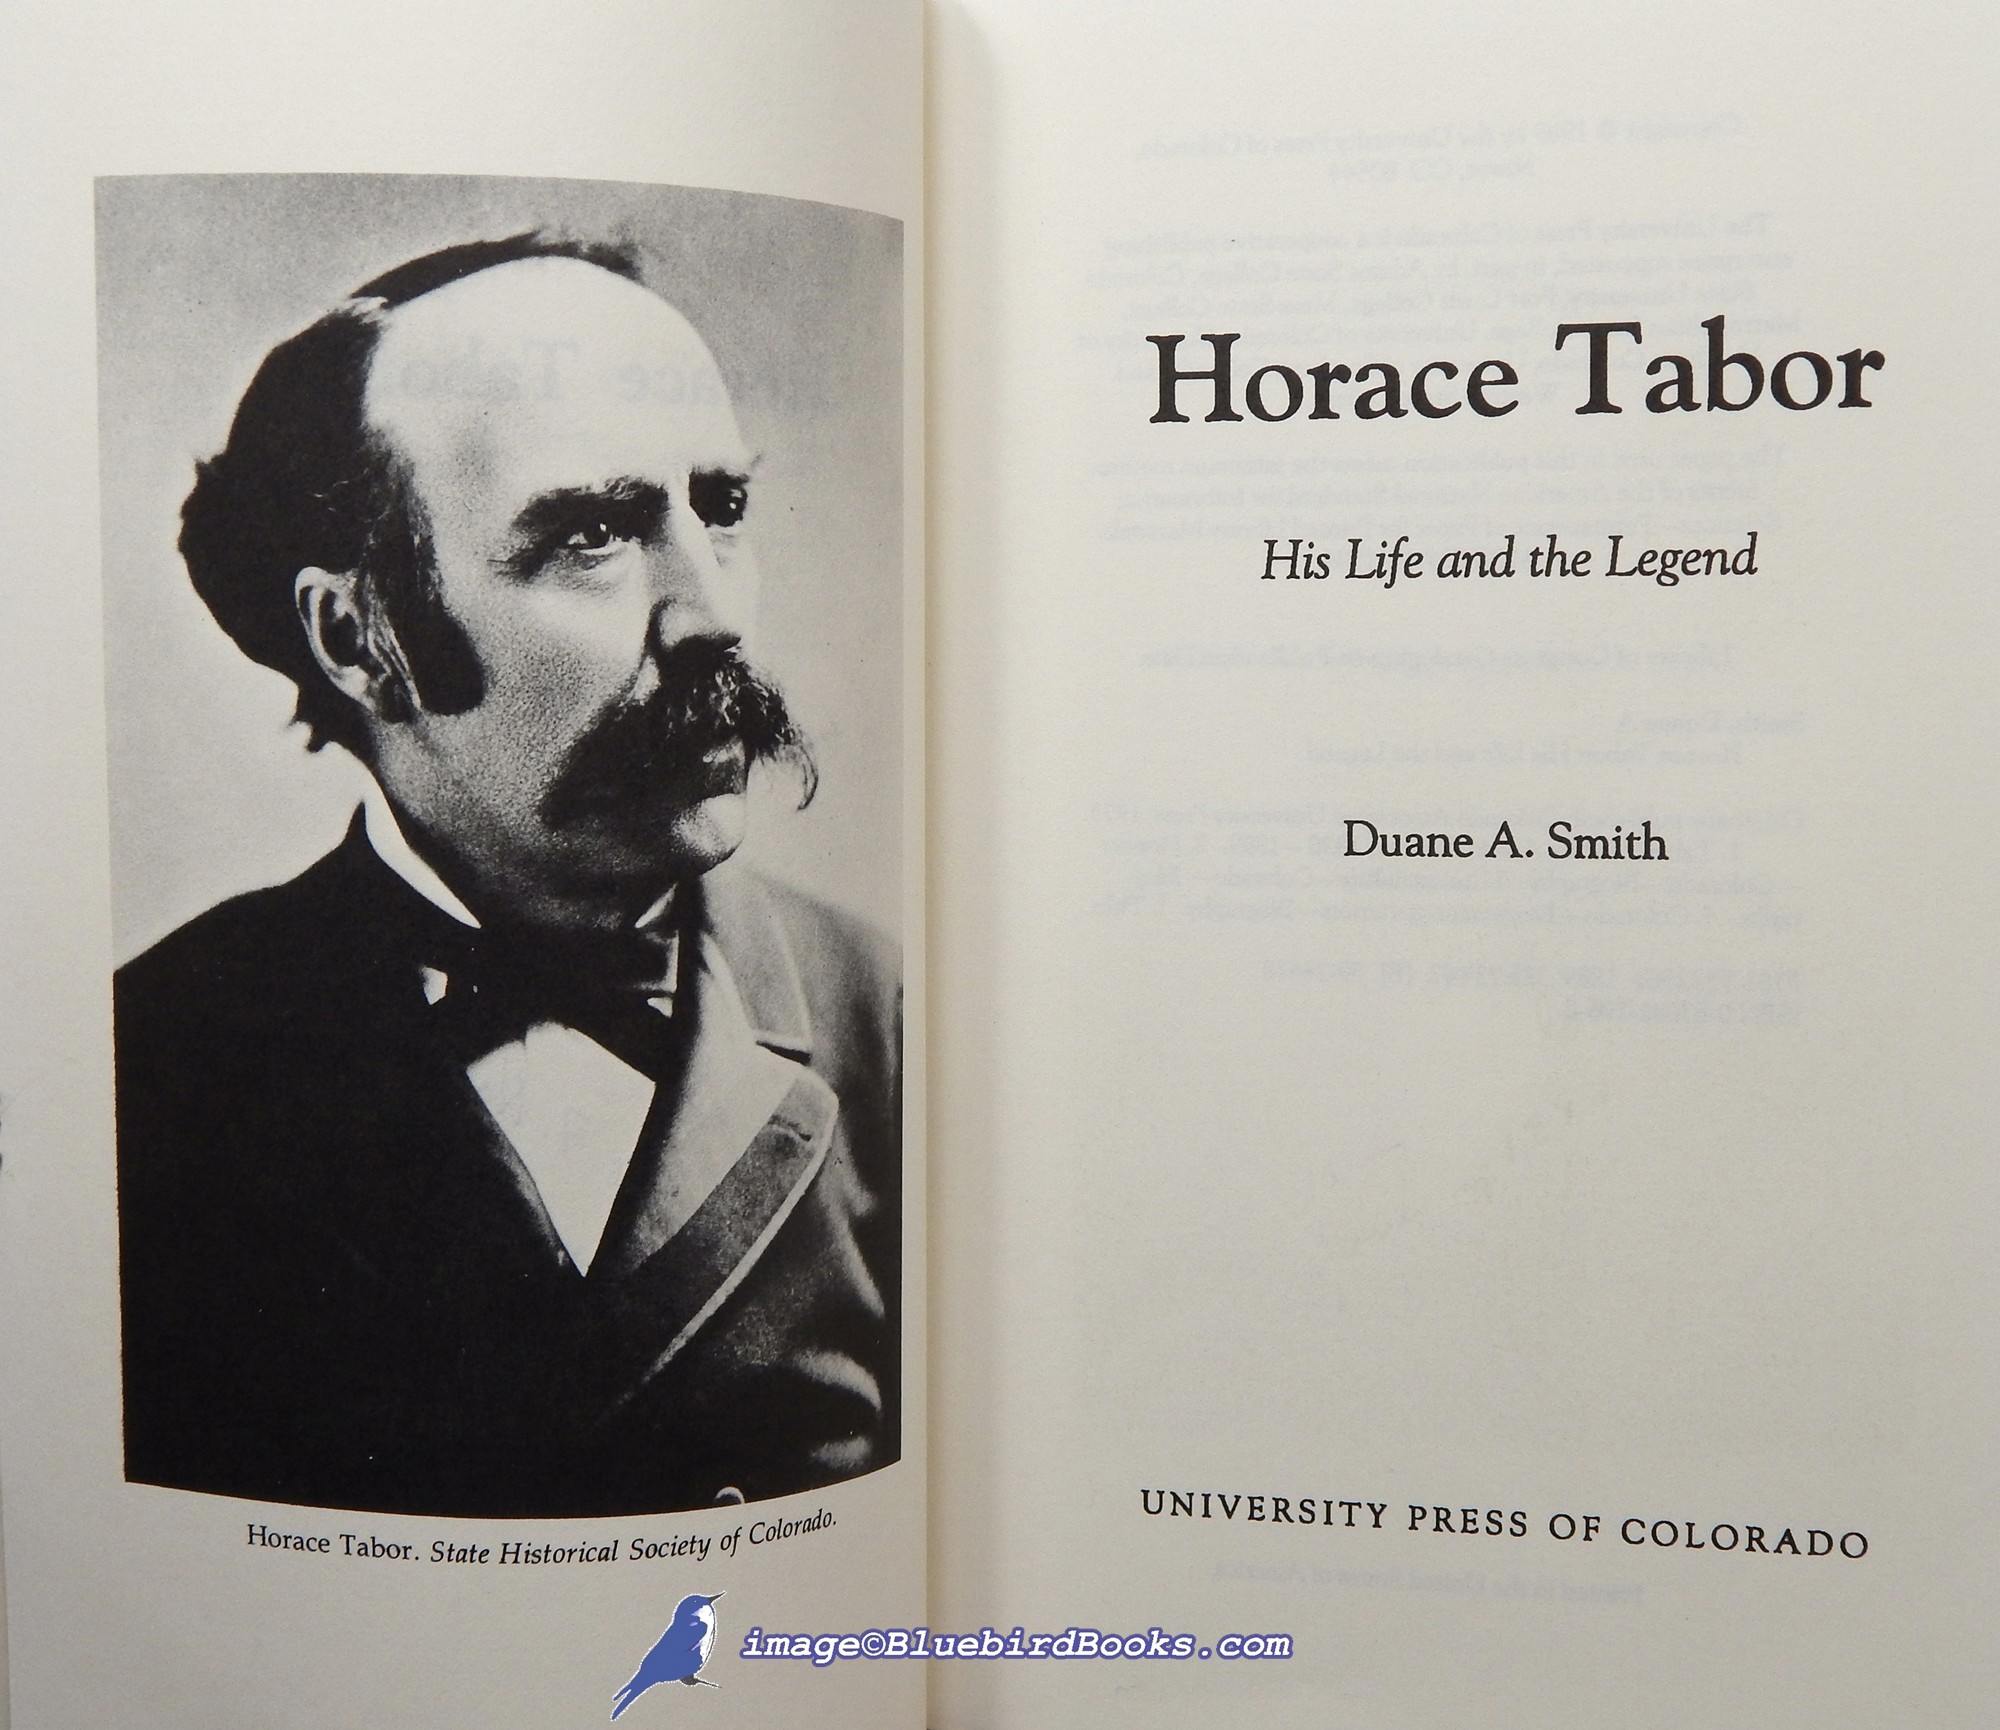 SMITH, DUANE A. - Horace Tabor: His Life and Legend